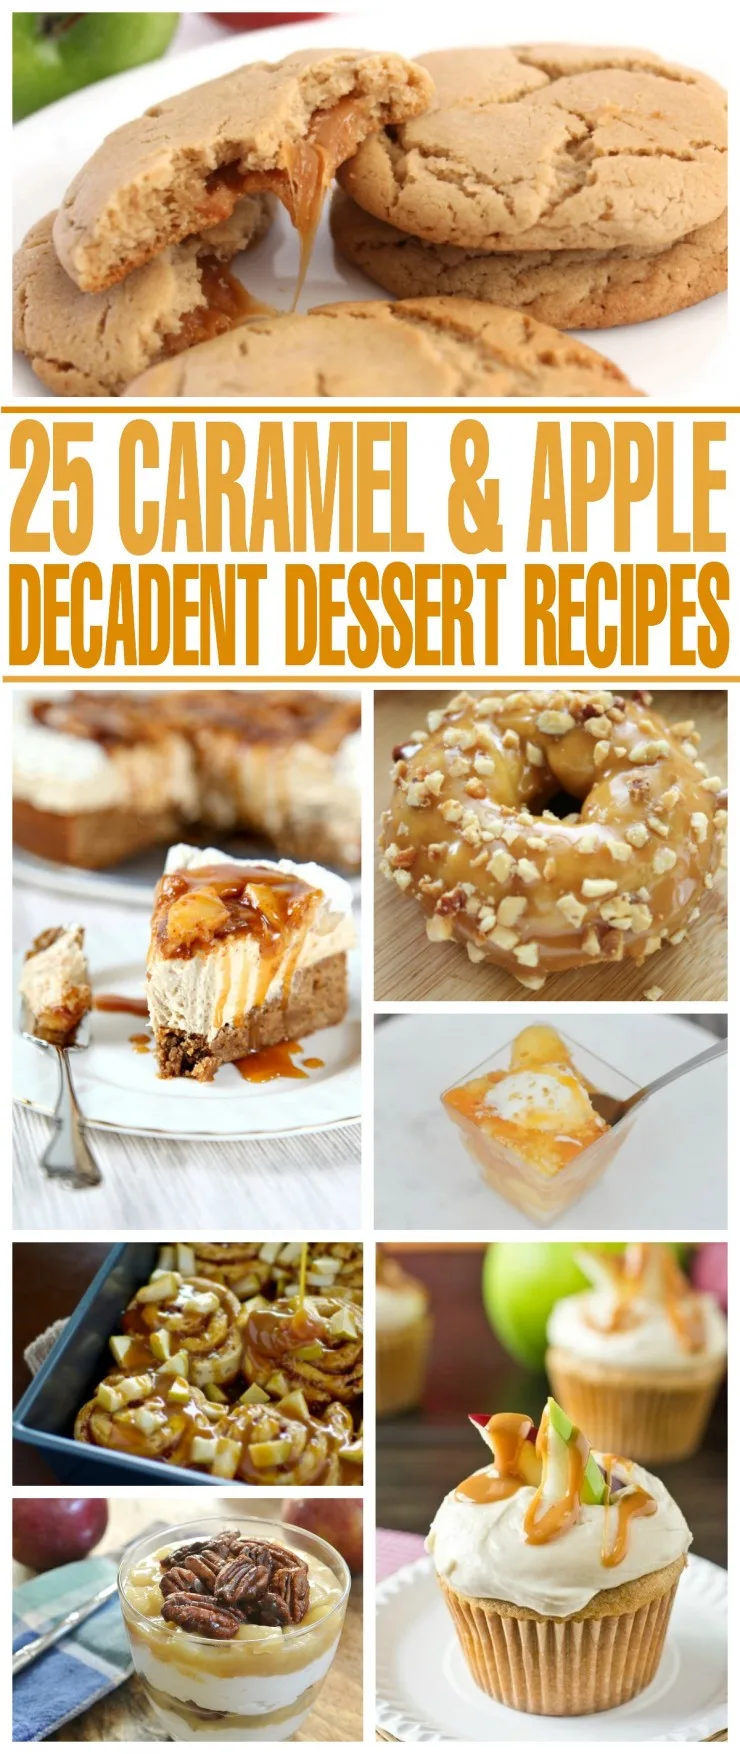 Caramel & Apple go hand in hand like bacon and eggs so it should come as no surprise that there are an endless amount of decadent caramel & apple dessert recipes available. From donuts to cheesecakes, here are some of the best recipes featuring caramel and apple.